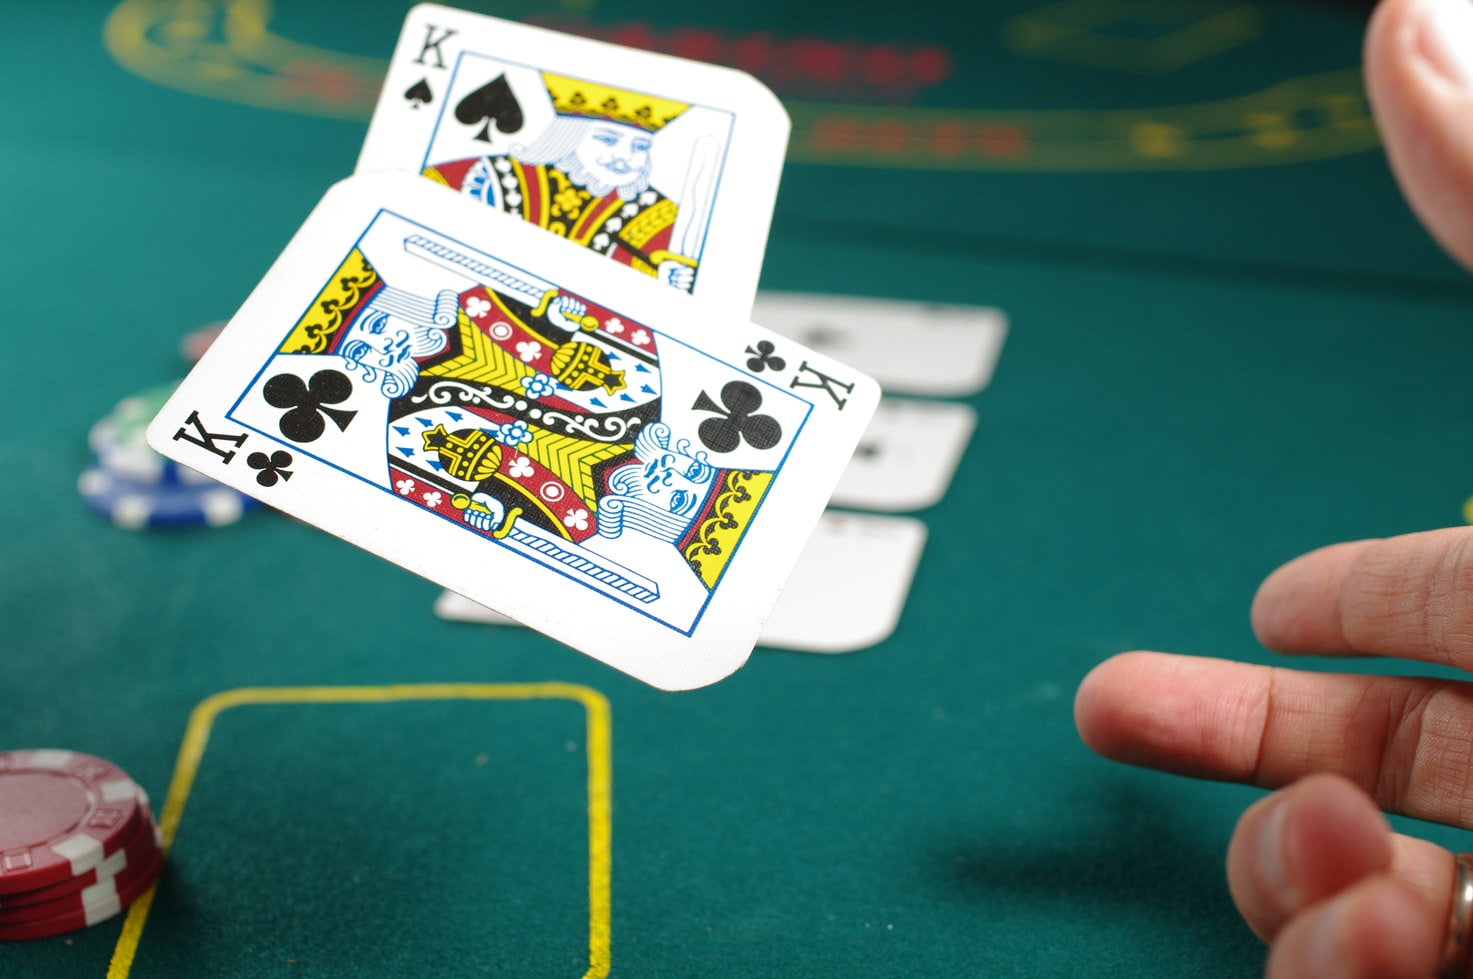 What are some pros and cons of working as a casino dealer